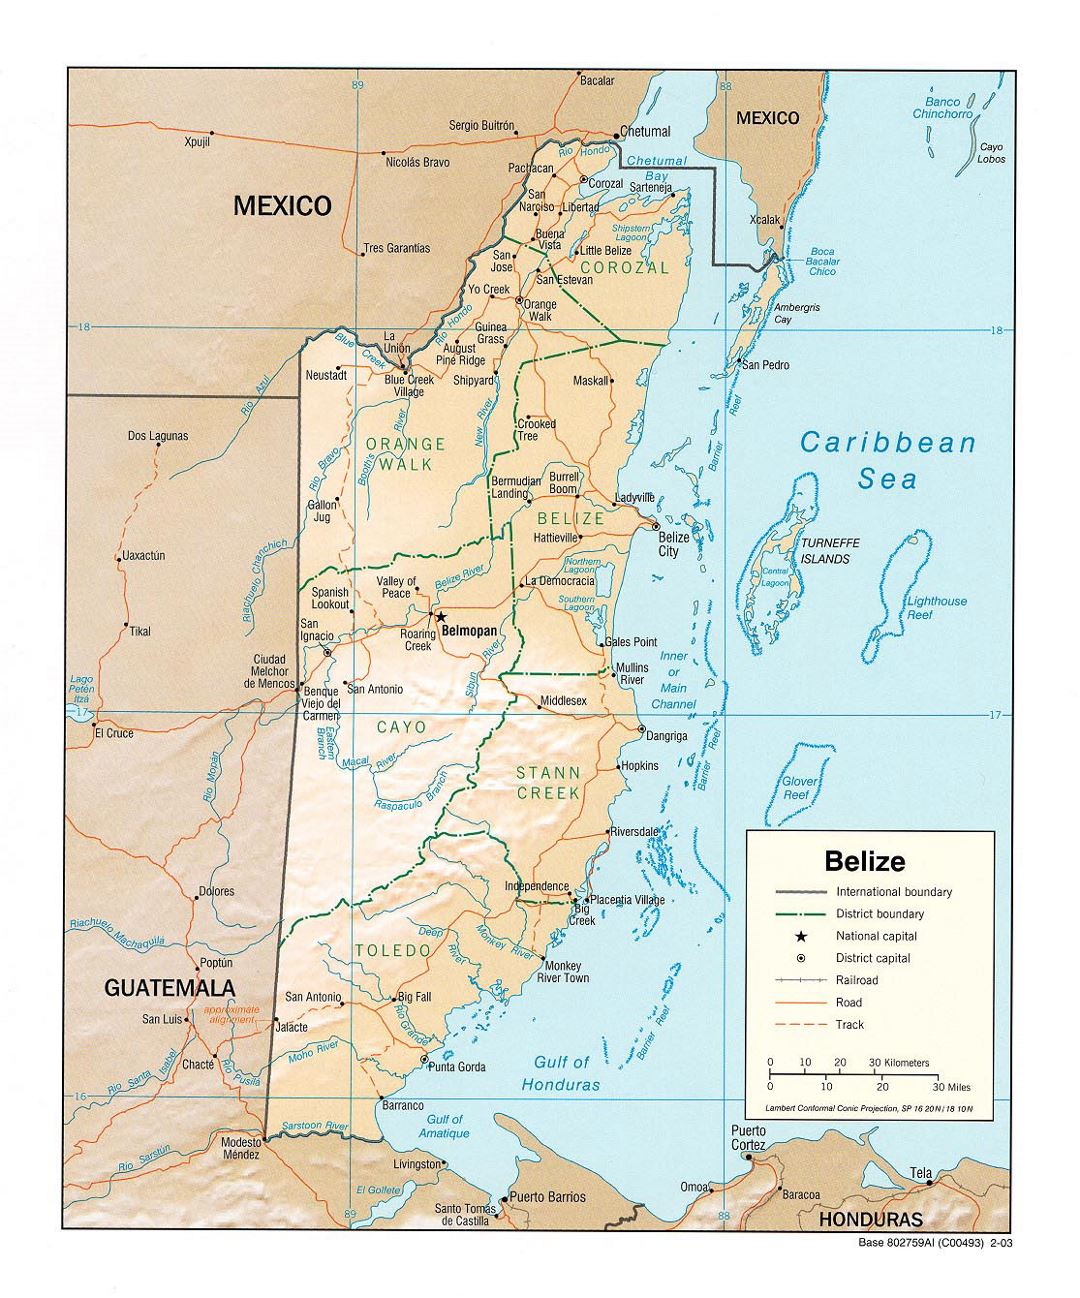 Detailed political and administrative map of Belize with relief, roads, railroads and major cities - 2003